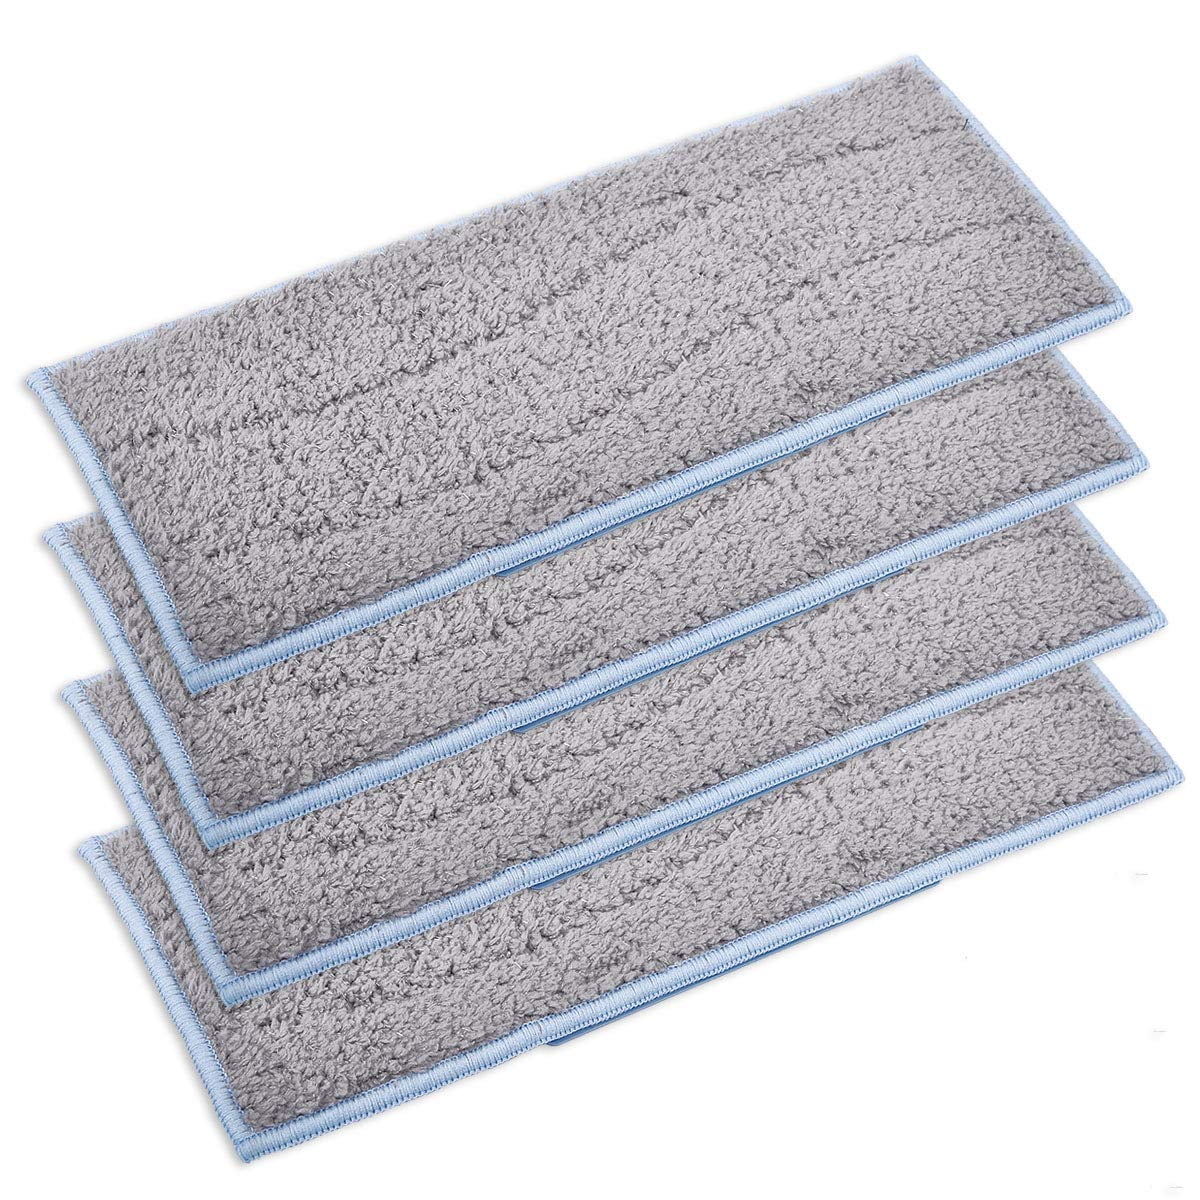 Washable Wet/Dry Mop Cloth Cleaning Cloth Pad Parts for iRobot Braava Jet M6 